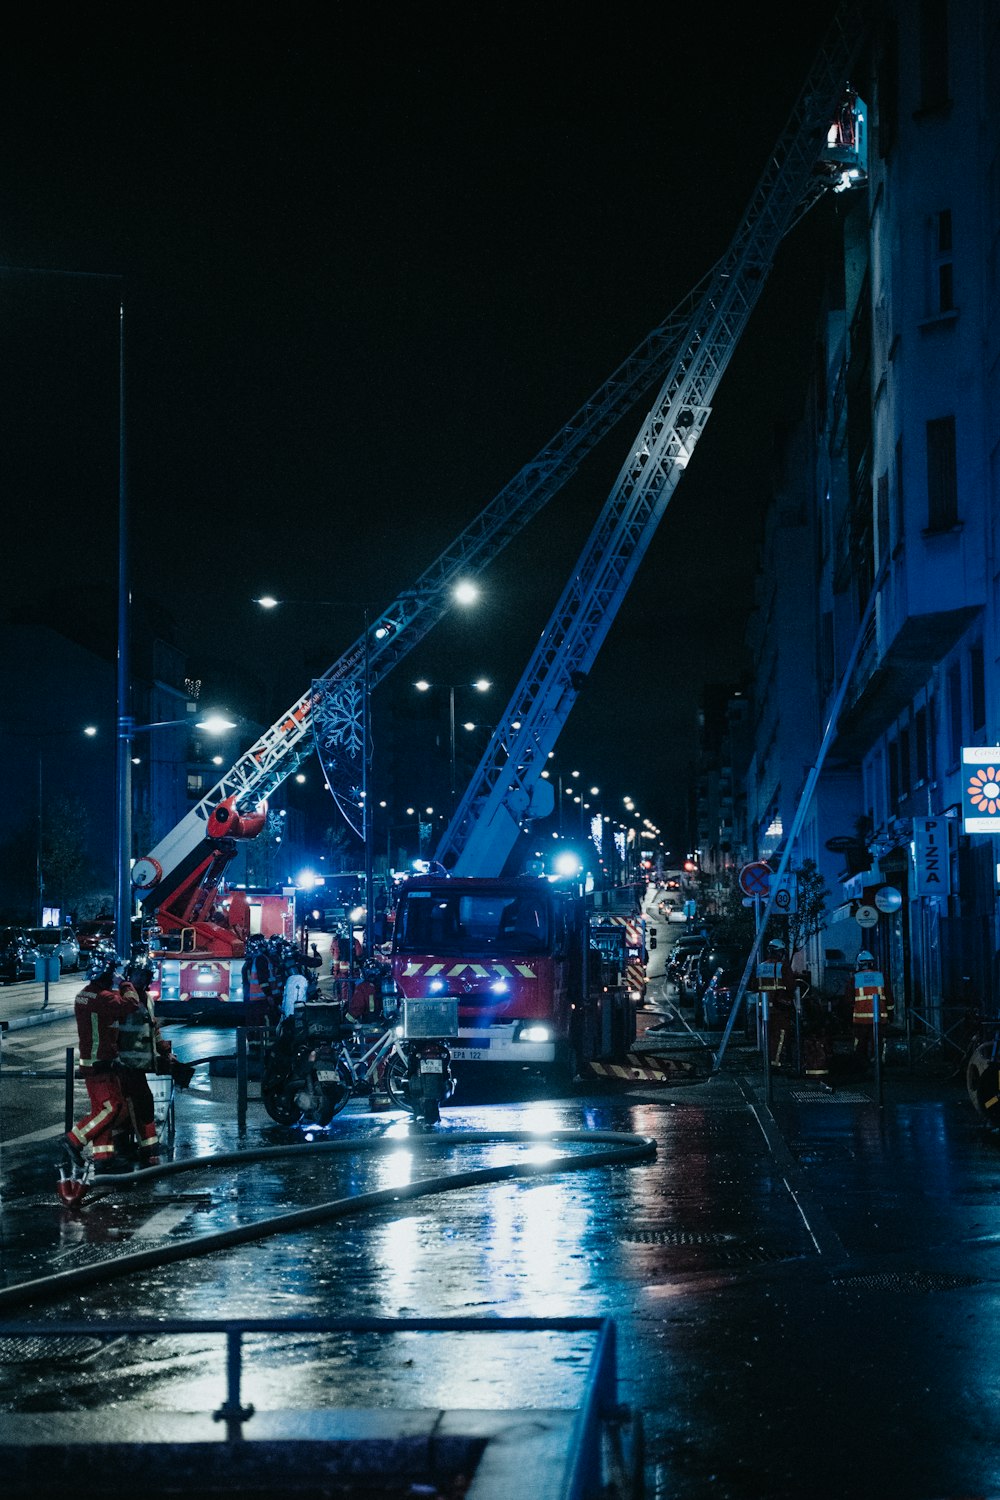 a fire truck and a firetruck on a city street at night